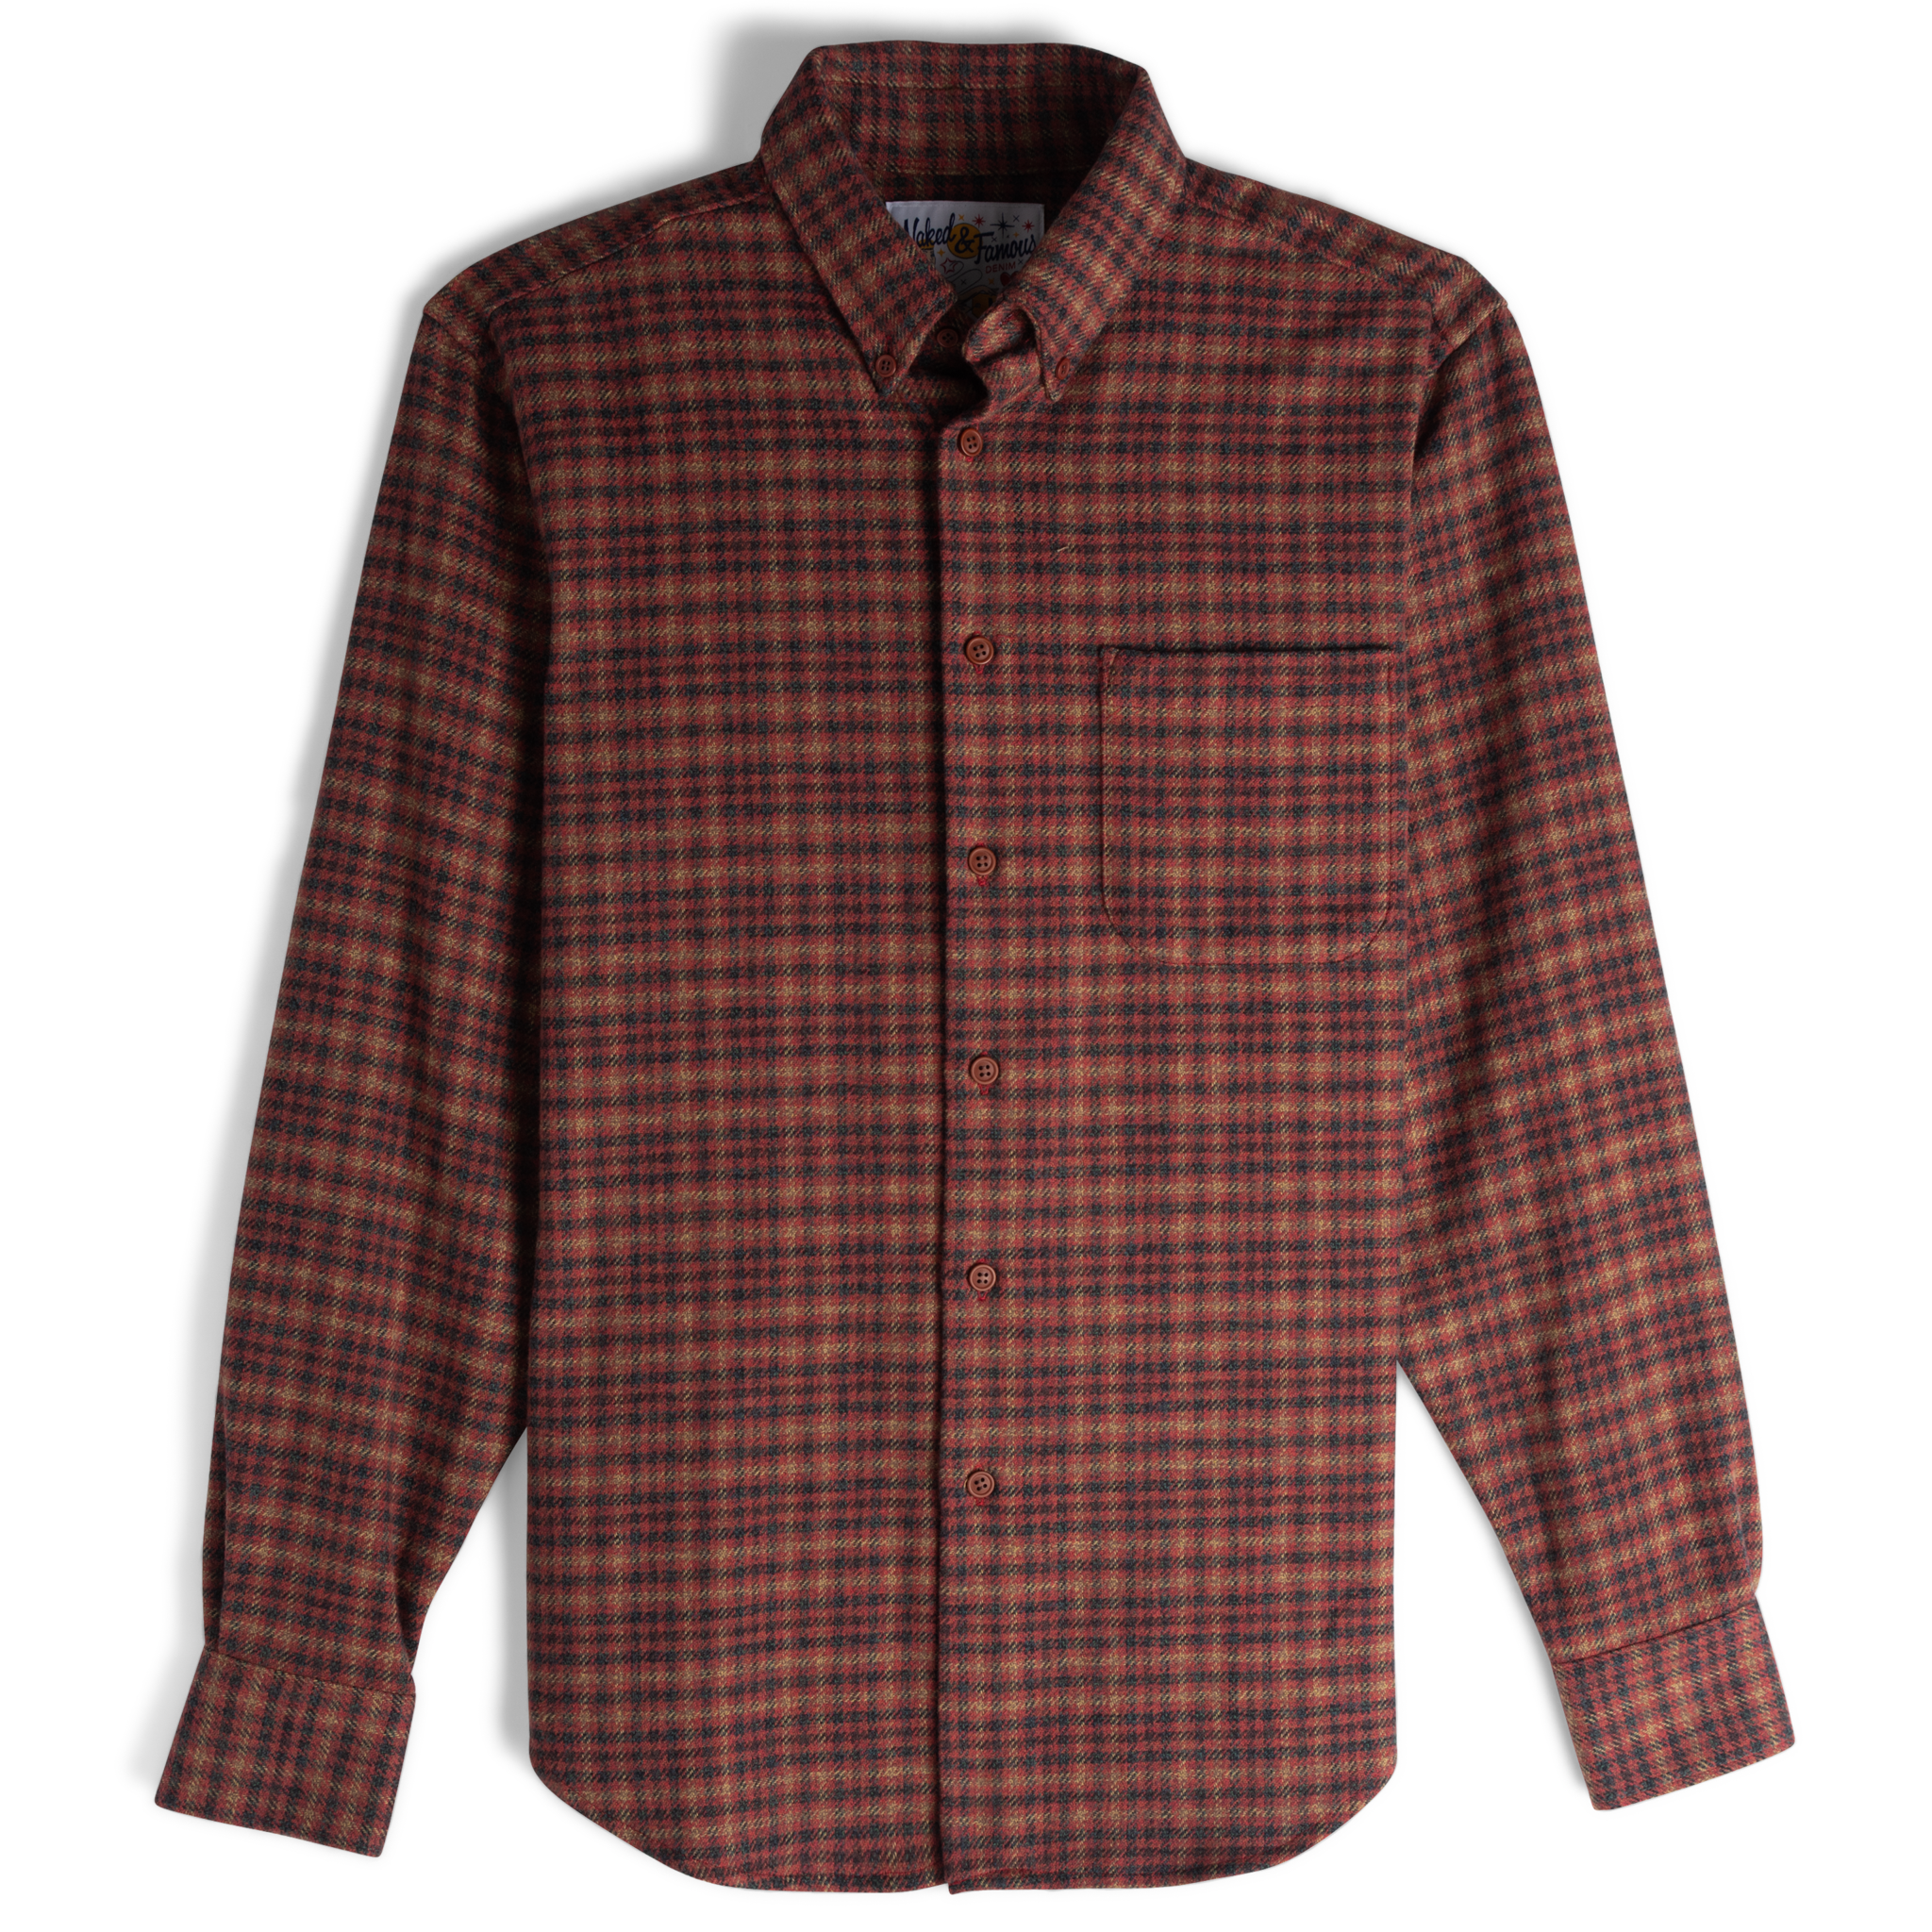  Easy Shirt - Heavy Vintage Flannel - Red - flat front   